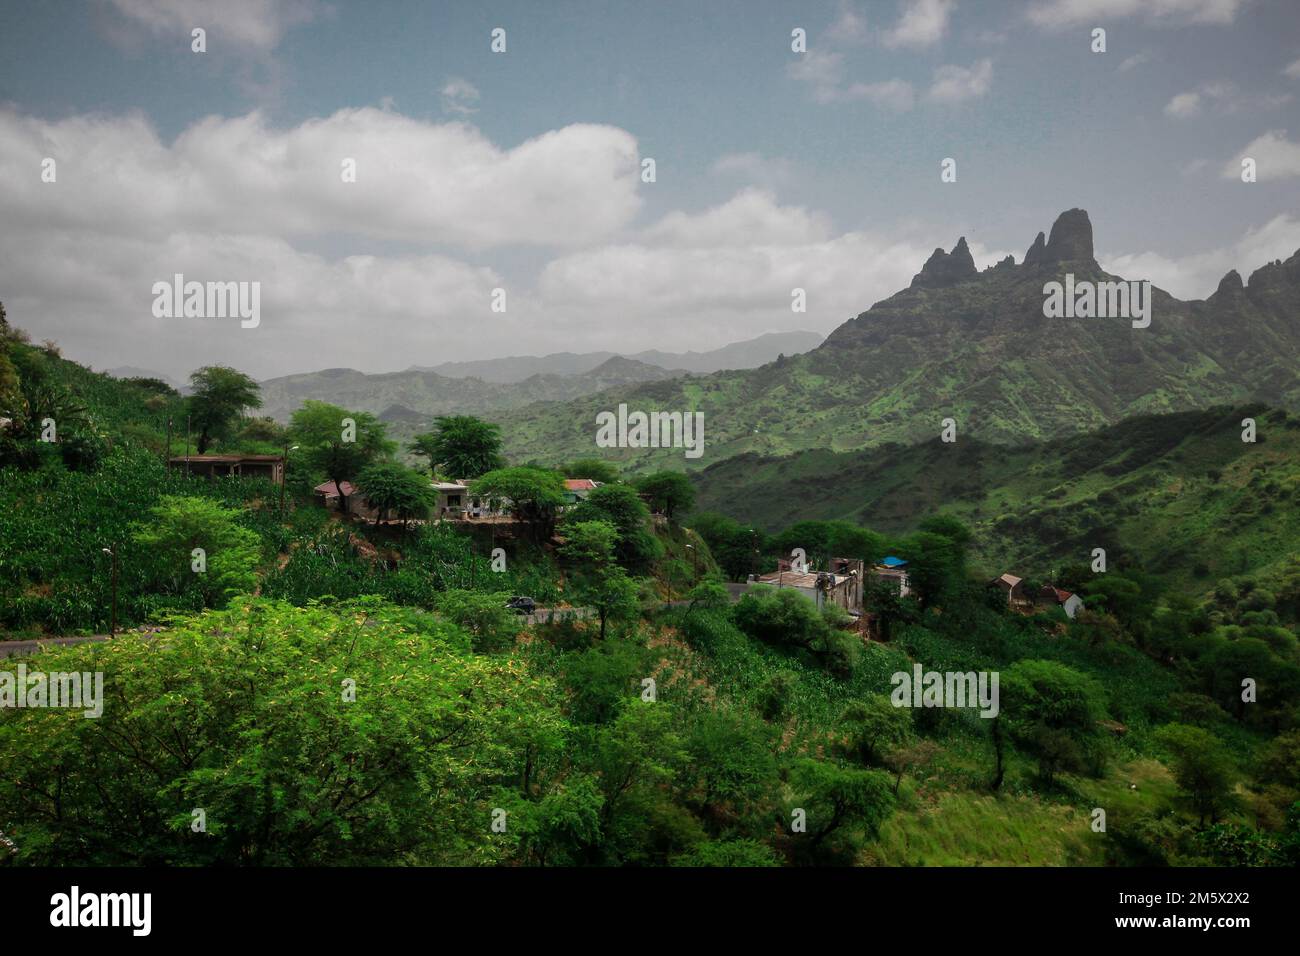 Green plains and mountains with view over the city of Assomada on the island of Santiago, Cabo Verde islands. Stock Photo